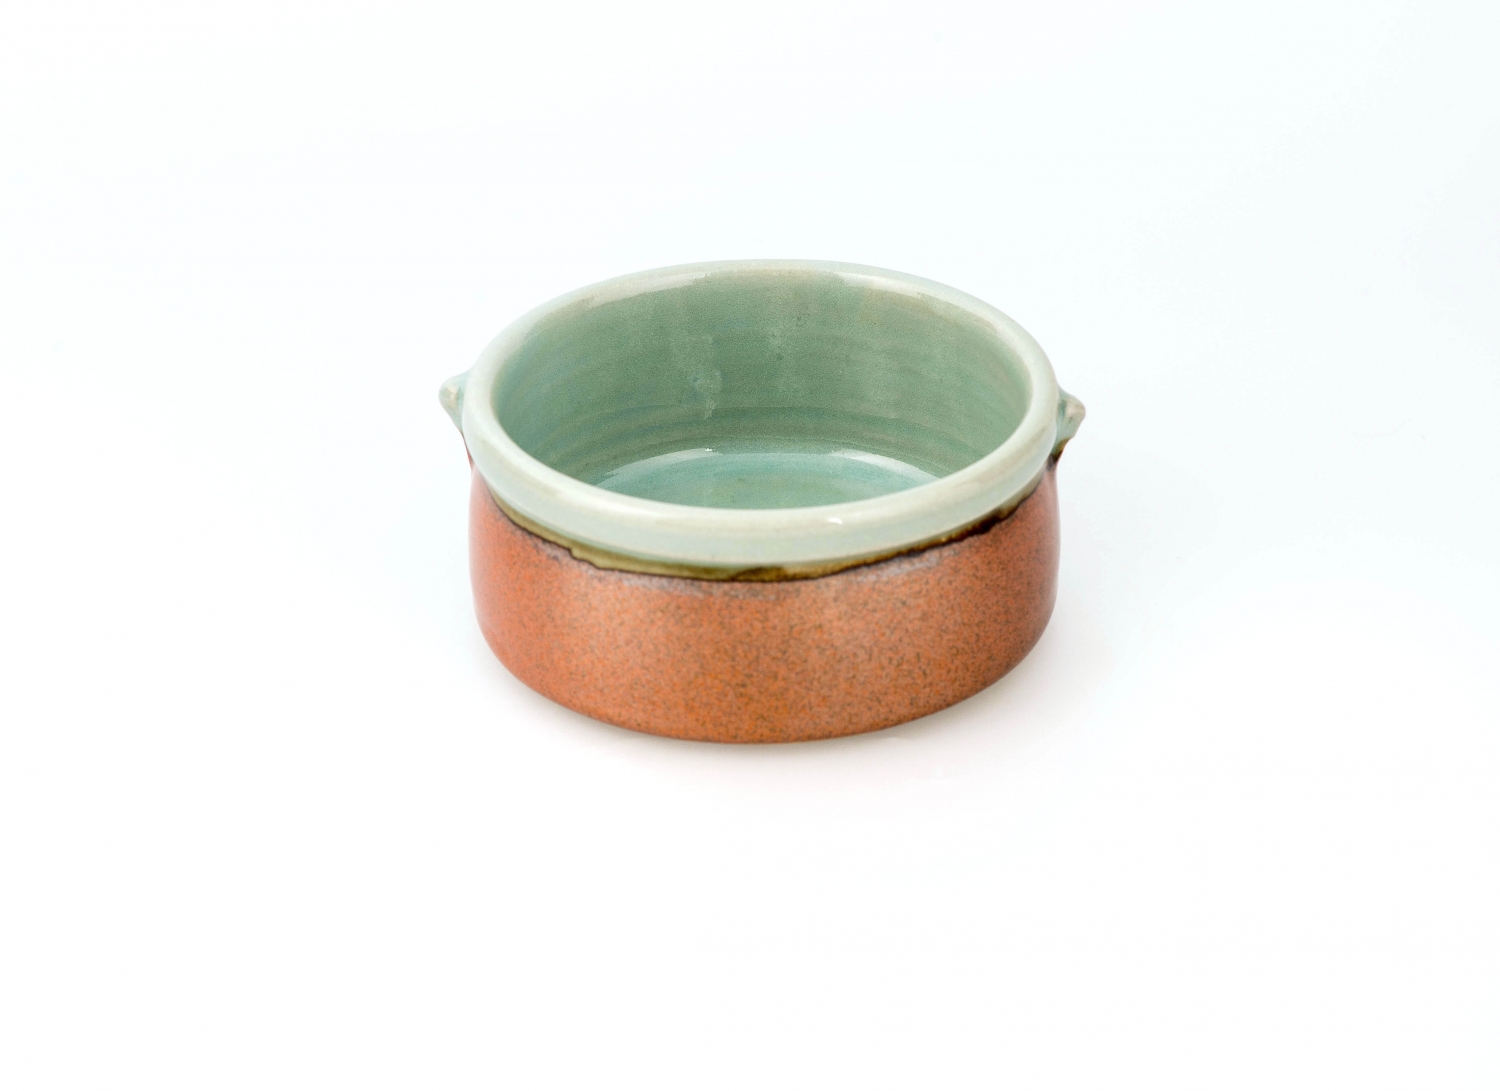 Small Oven Dish - image